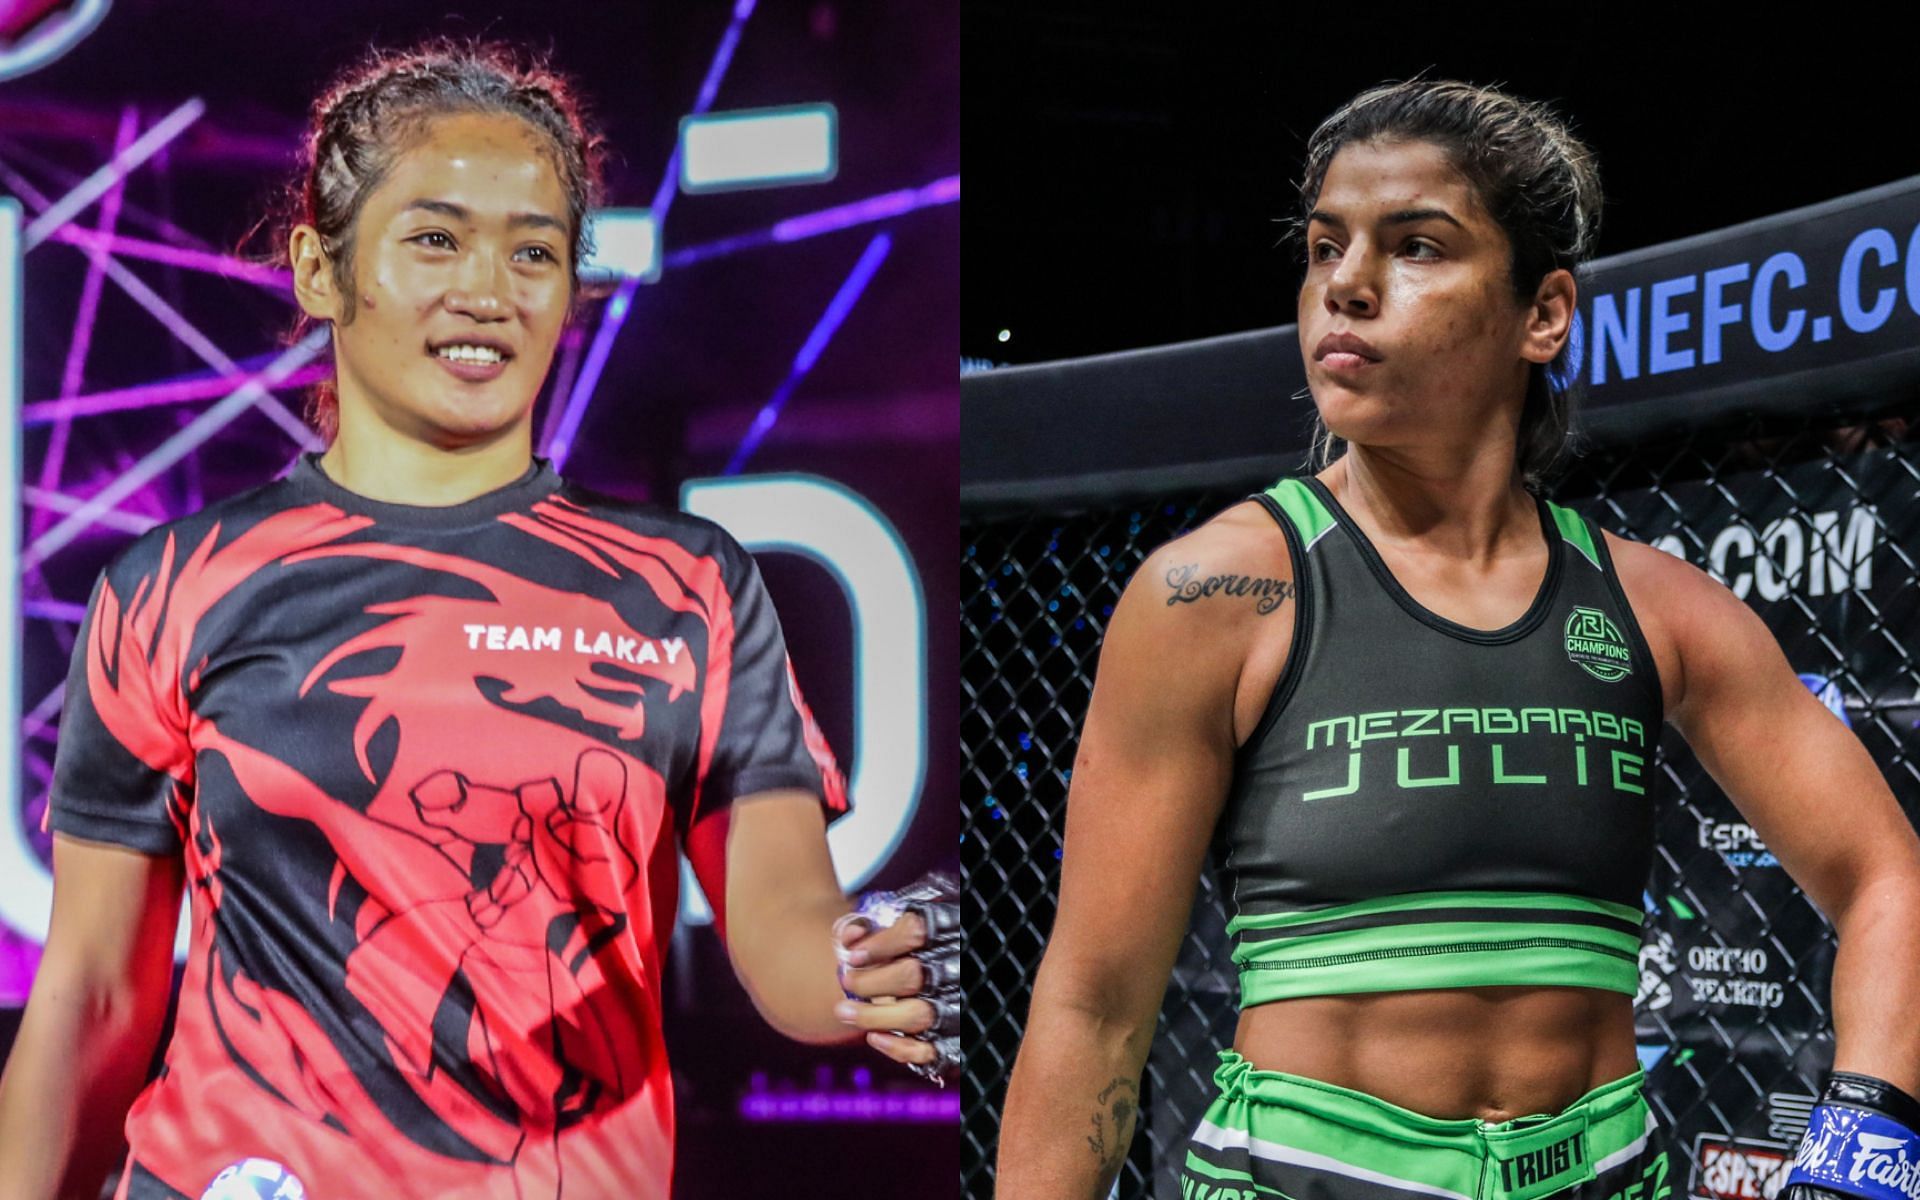 Jenelyn Olsim (left) is hungry to get a win against Julie Mezabarba (right). [Photos ONE Championship]